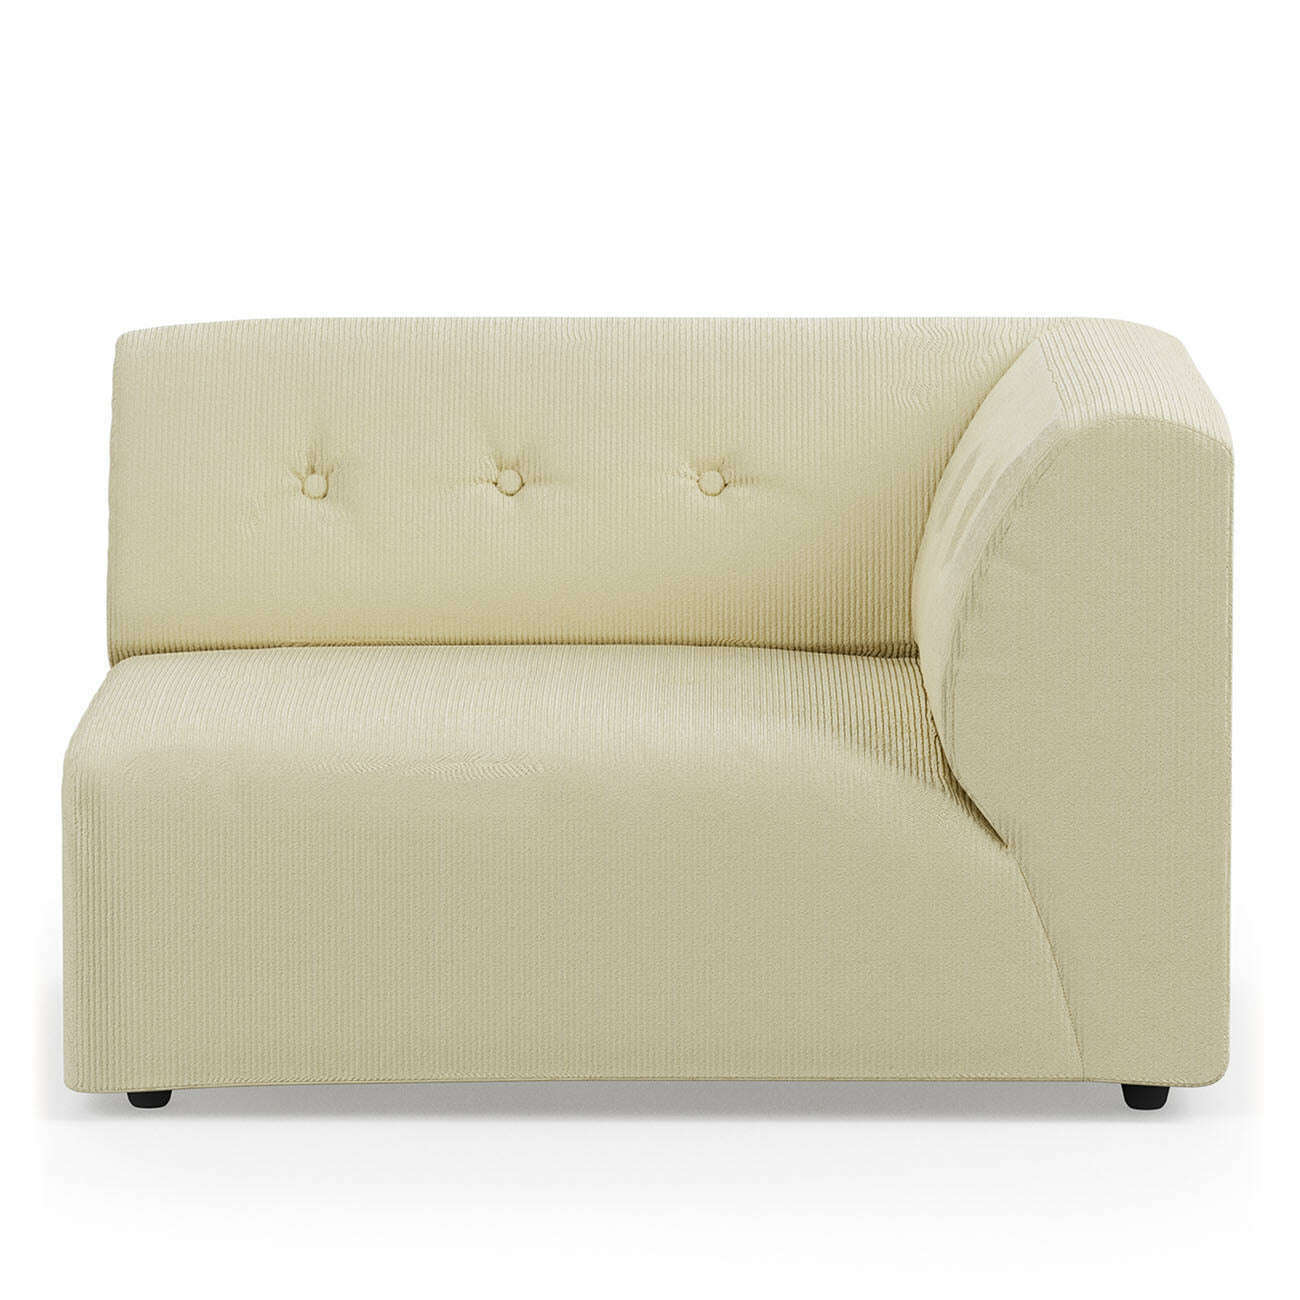 HKliving vint couch: element rechts 15-seat corduroy rib hay